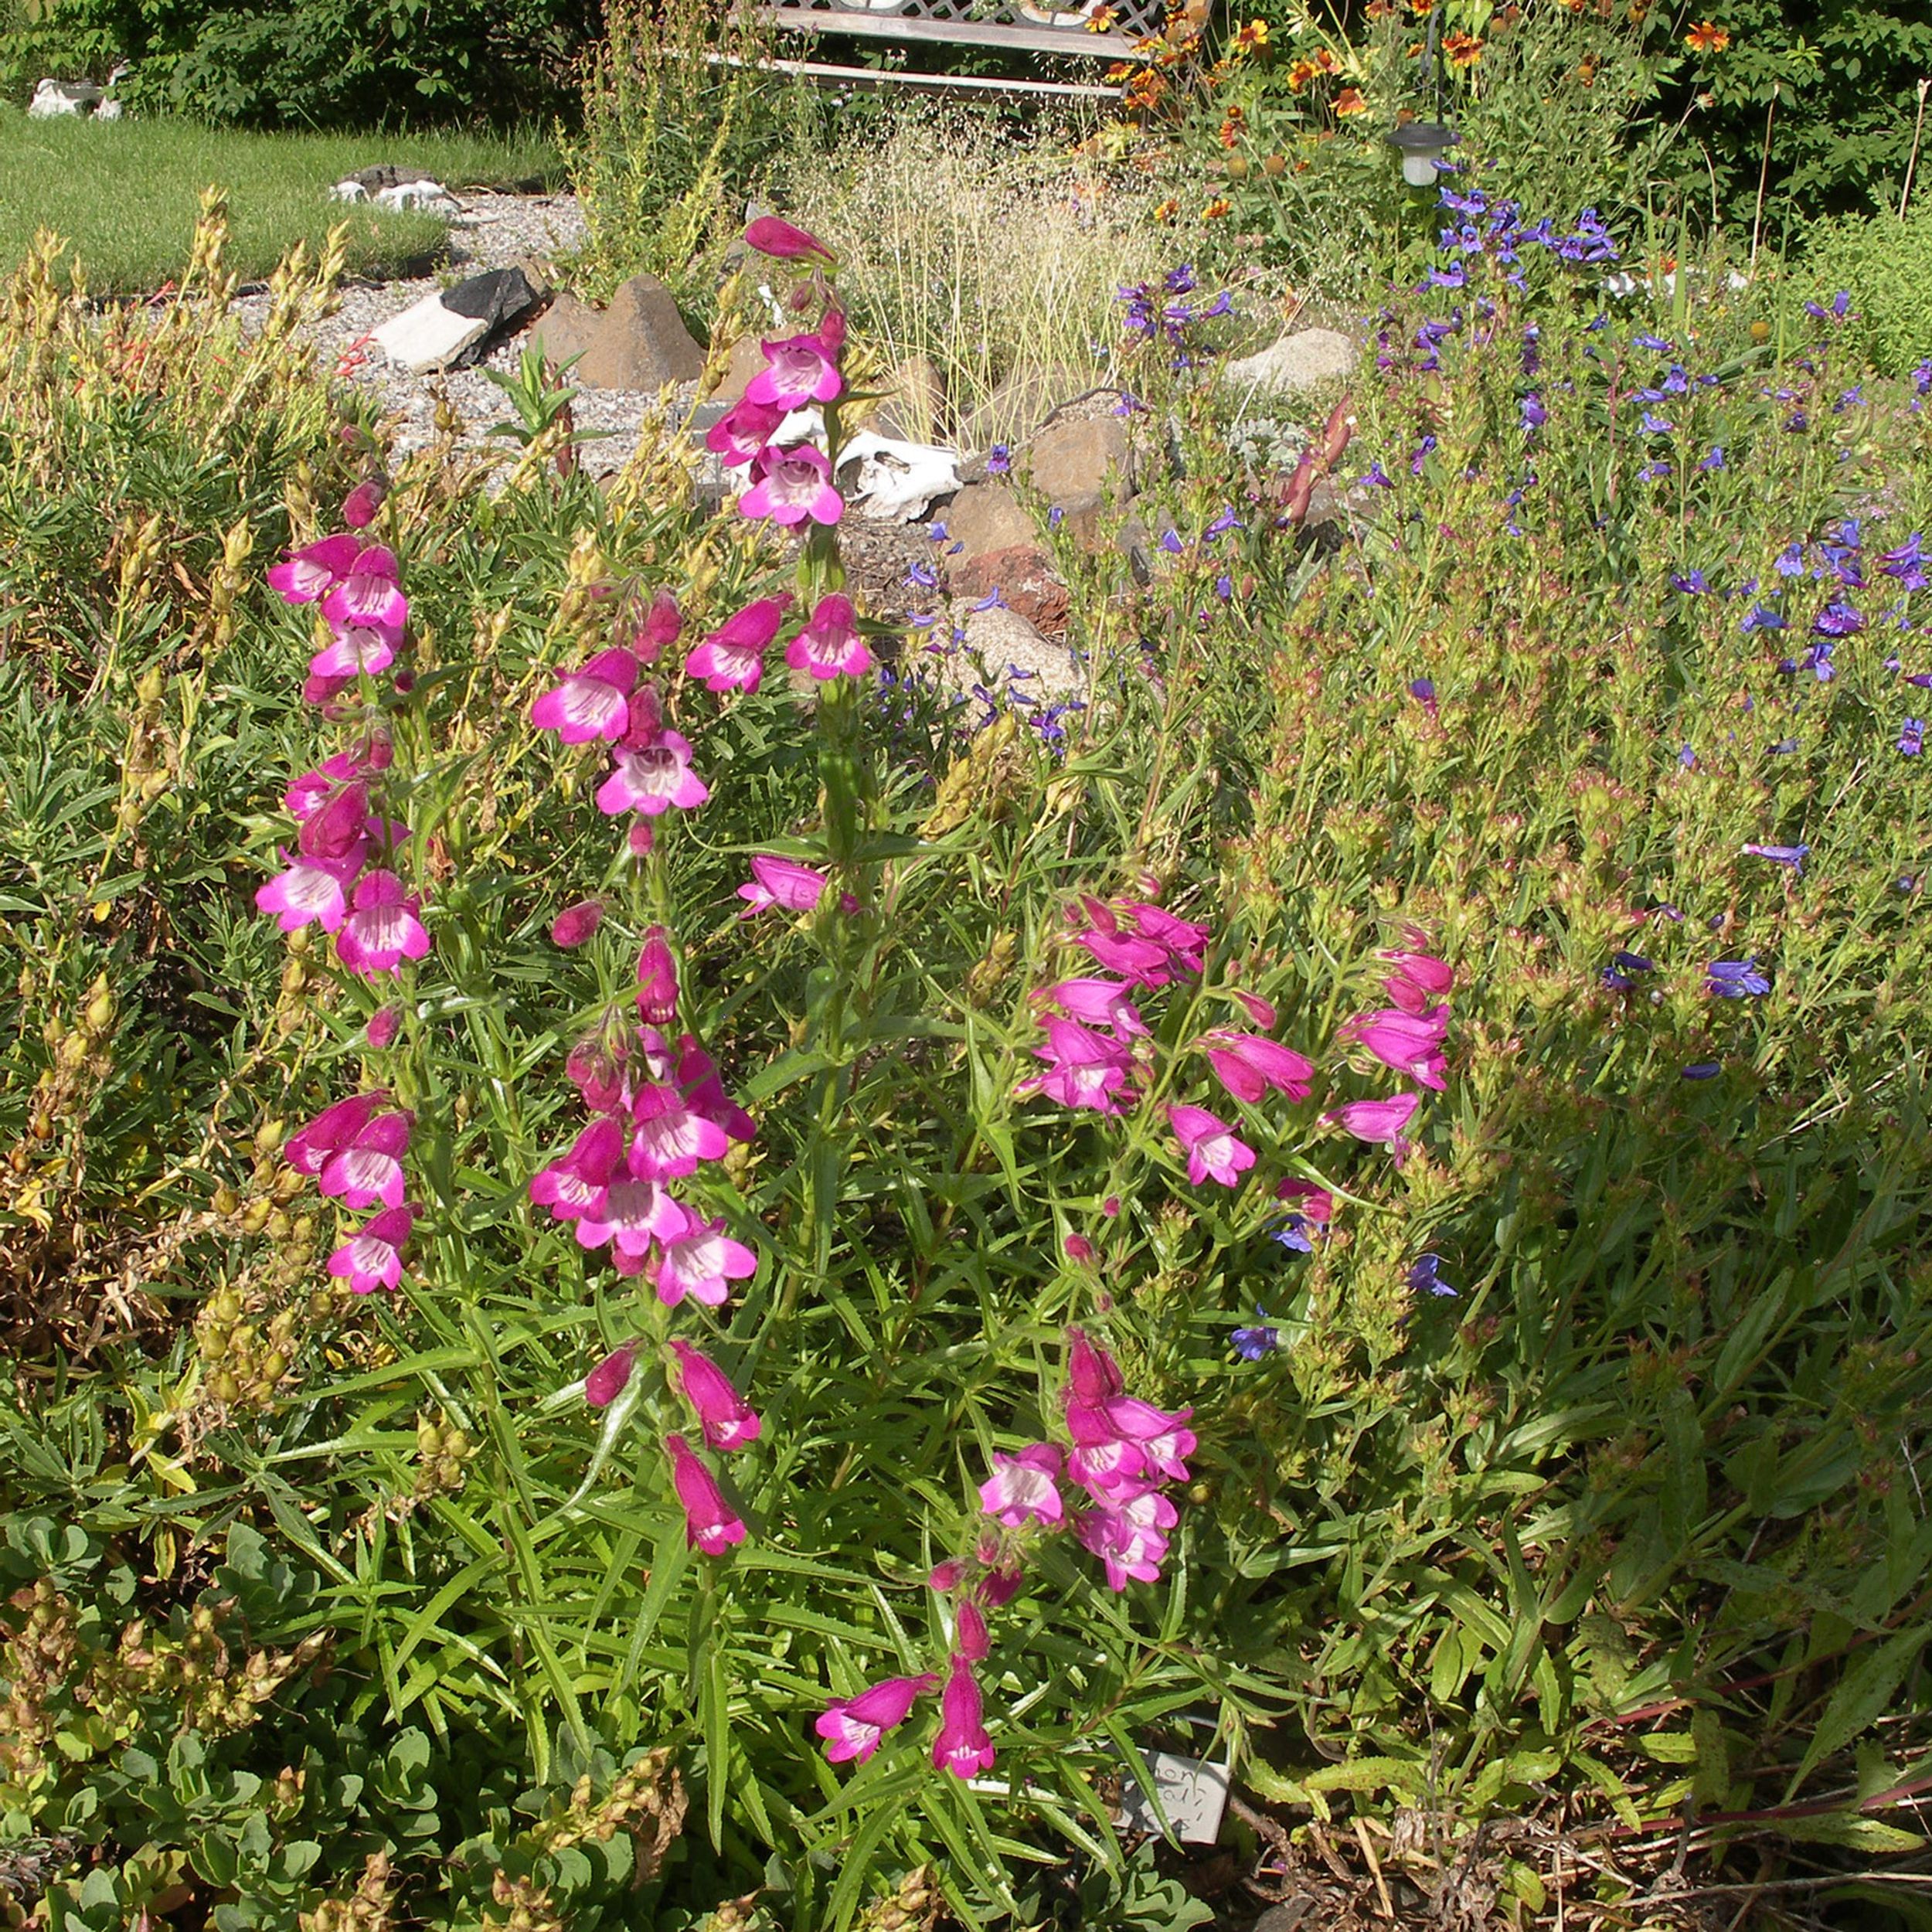 Hardy, native penstemons great most gardens | The Spokesman-Review